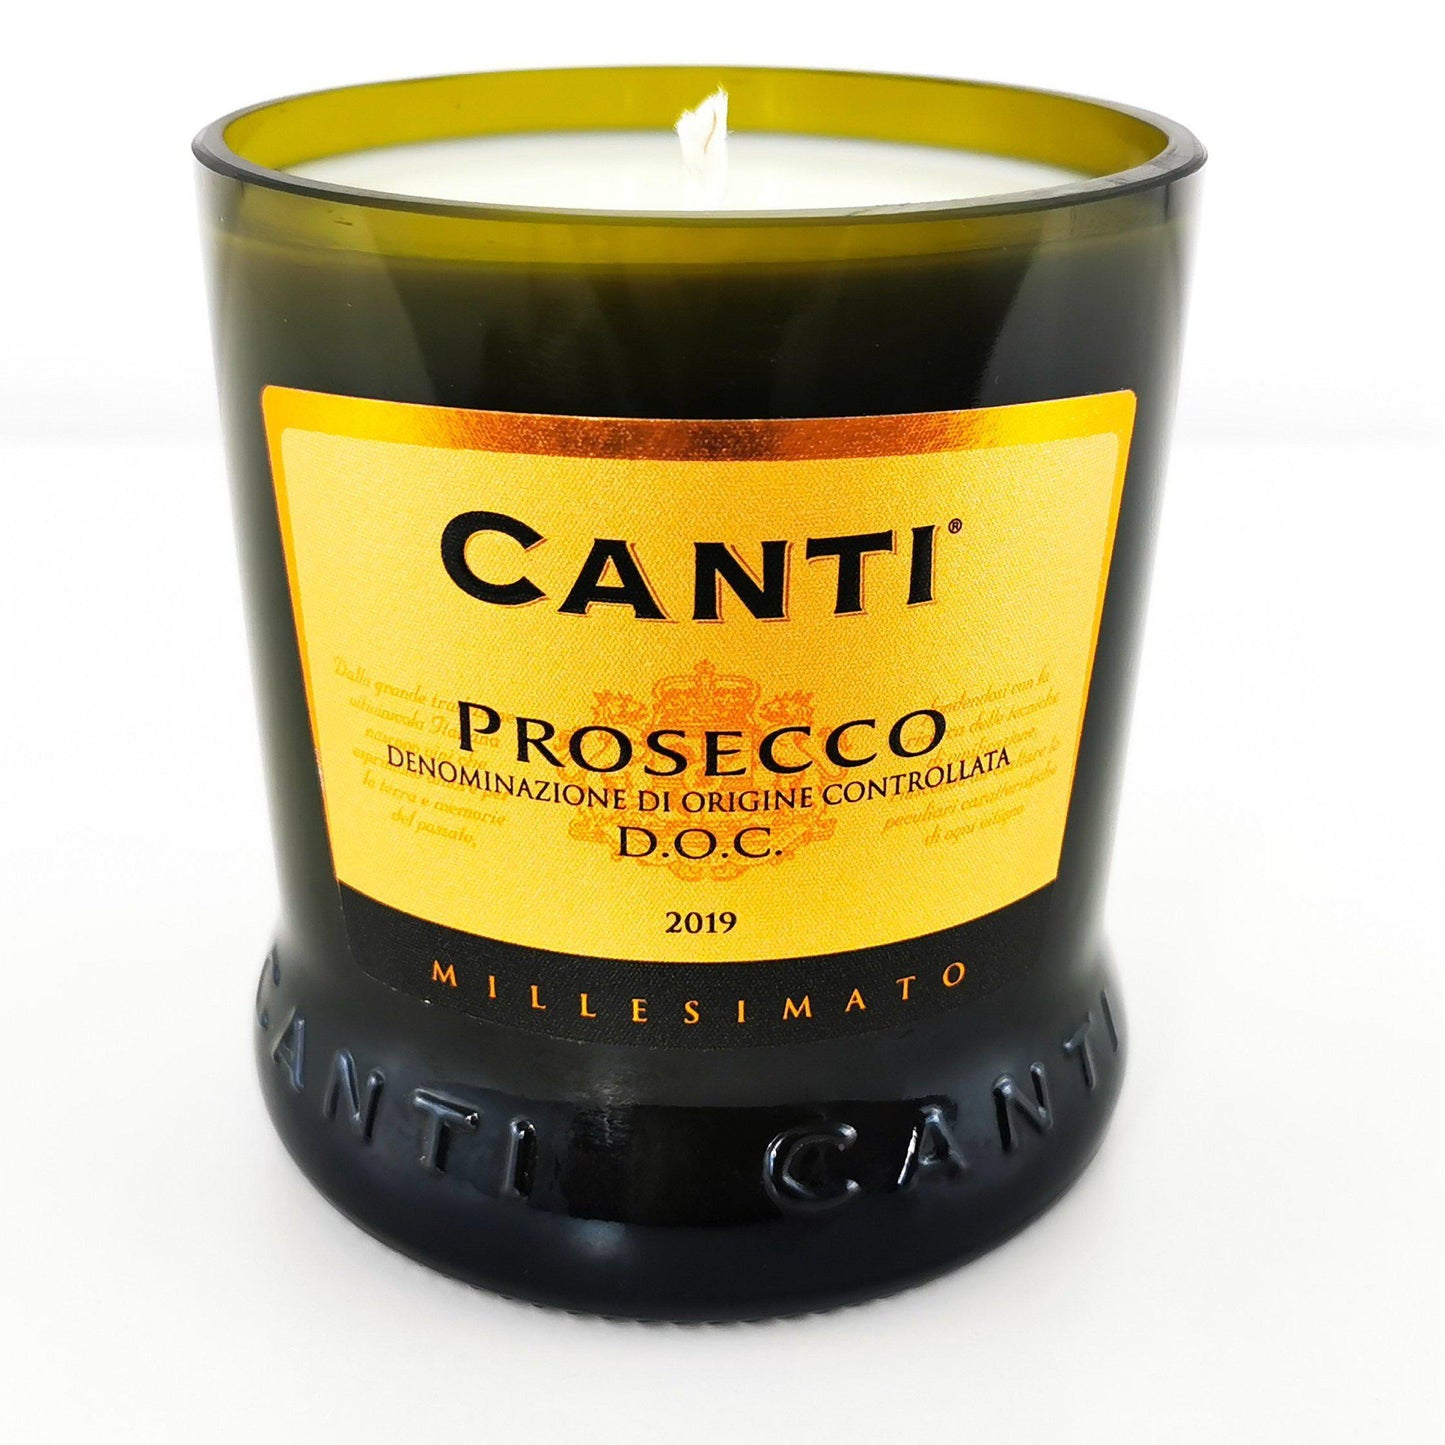 Eco Friendly-Canti Prosecco Bottle Candle-Wine & Prosecco Bottle Candles-Adhock Homeware